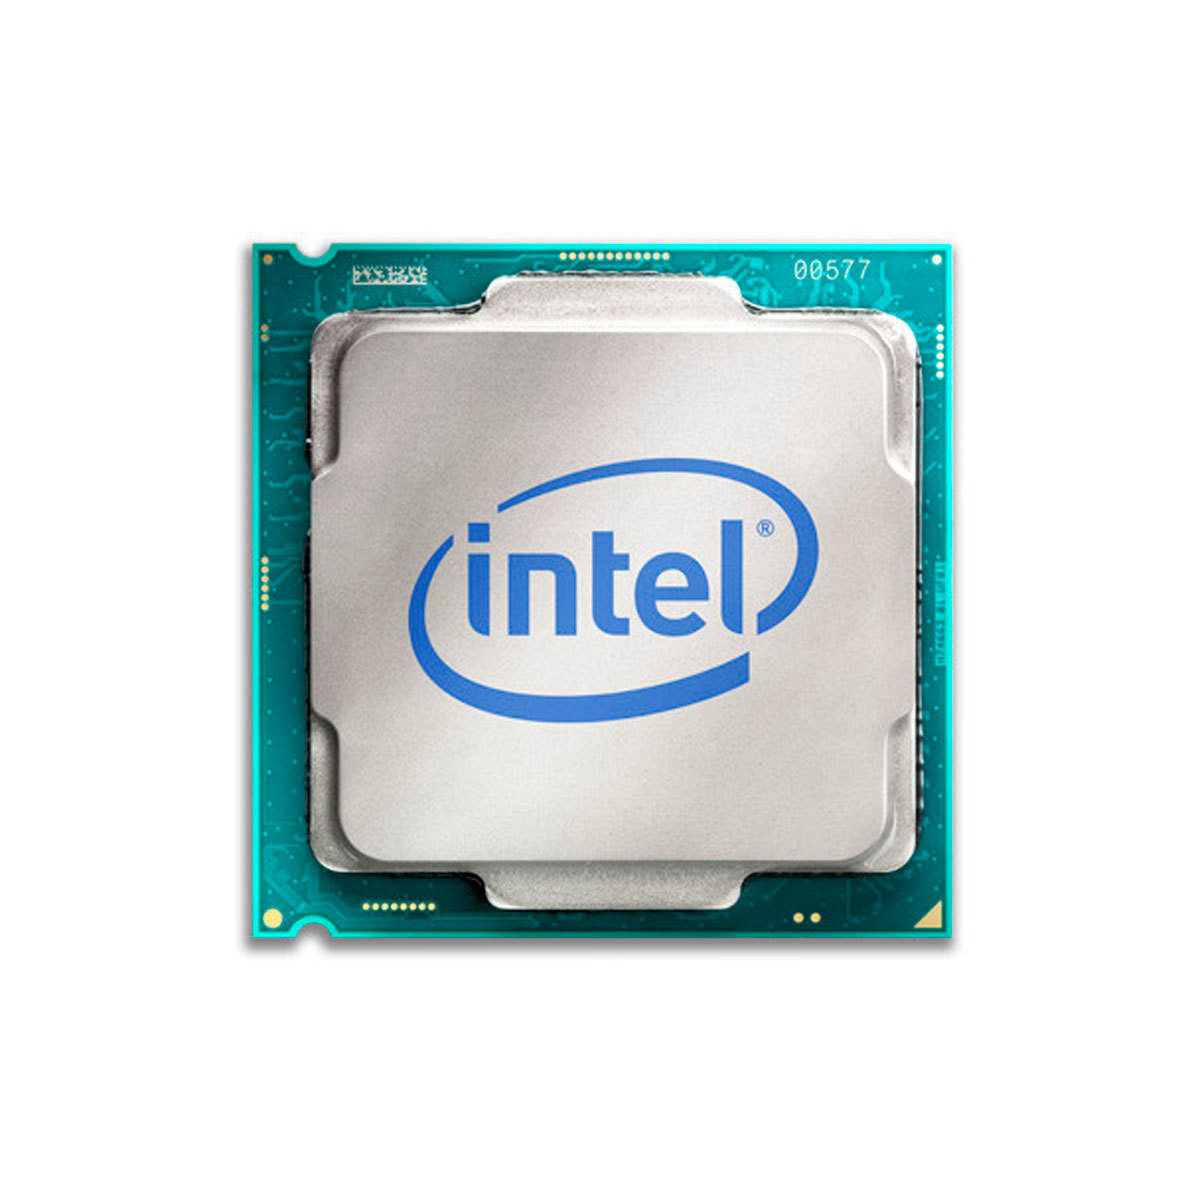 <span style="font-weight: bold;">Процессор Intel Original Core i3 7100 Soc-1151 (BX80677I37100 S R35C) Box</span><br>